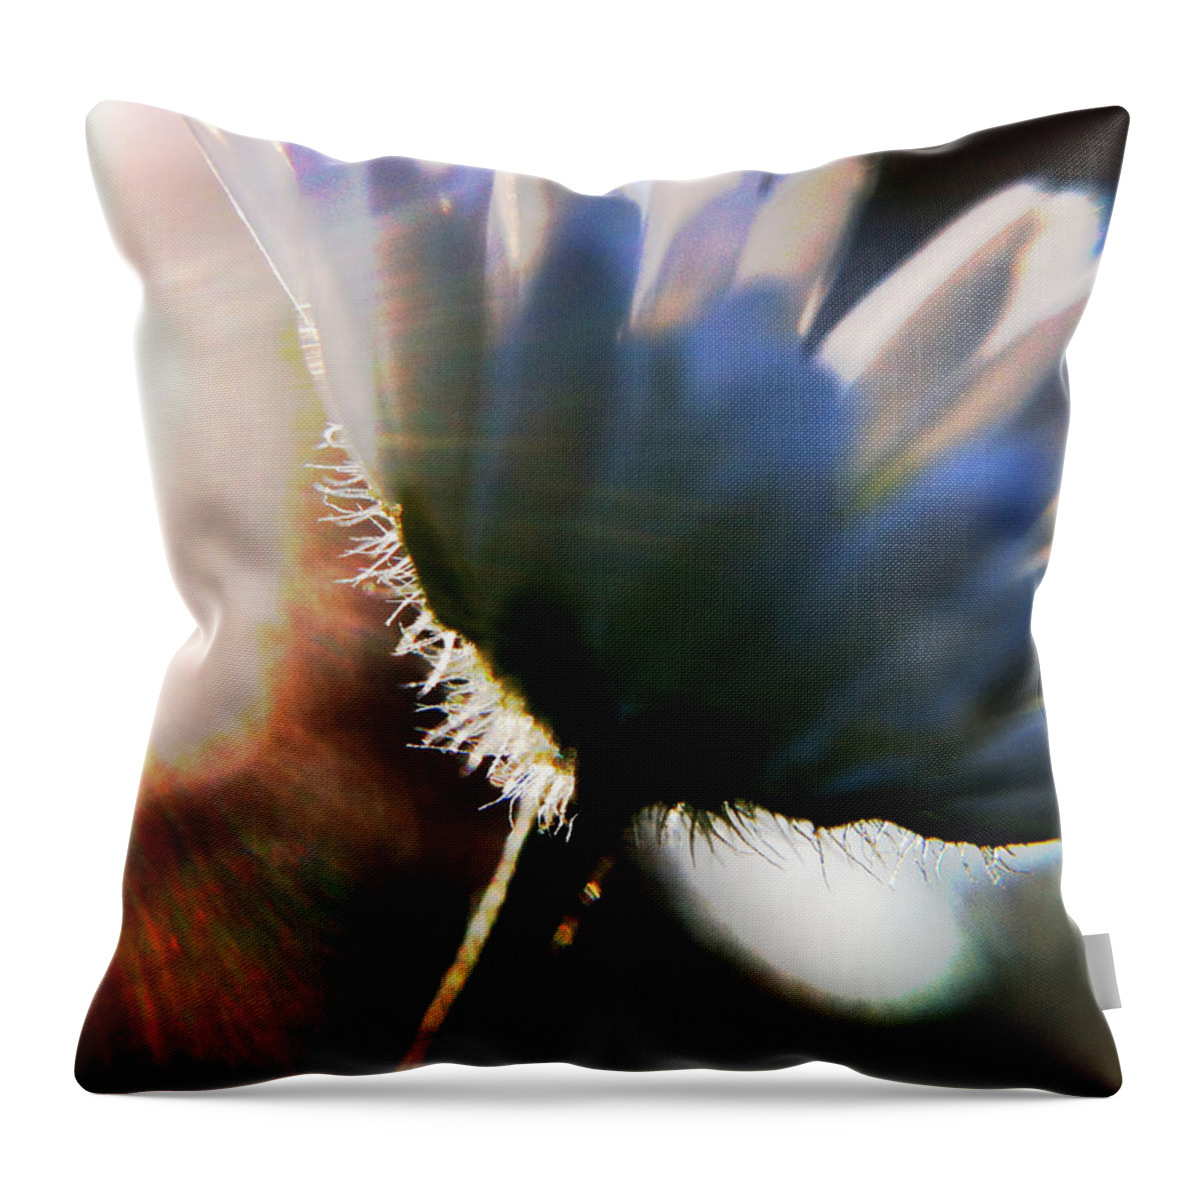 Macro Throw Pillow featuring the photograph Delicate Flower by Stevyn Llewellyn